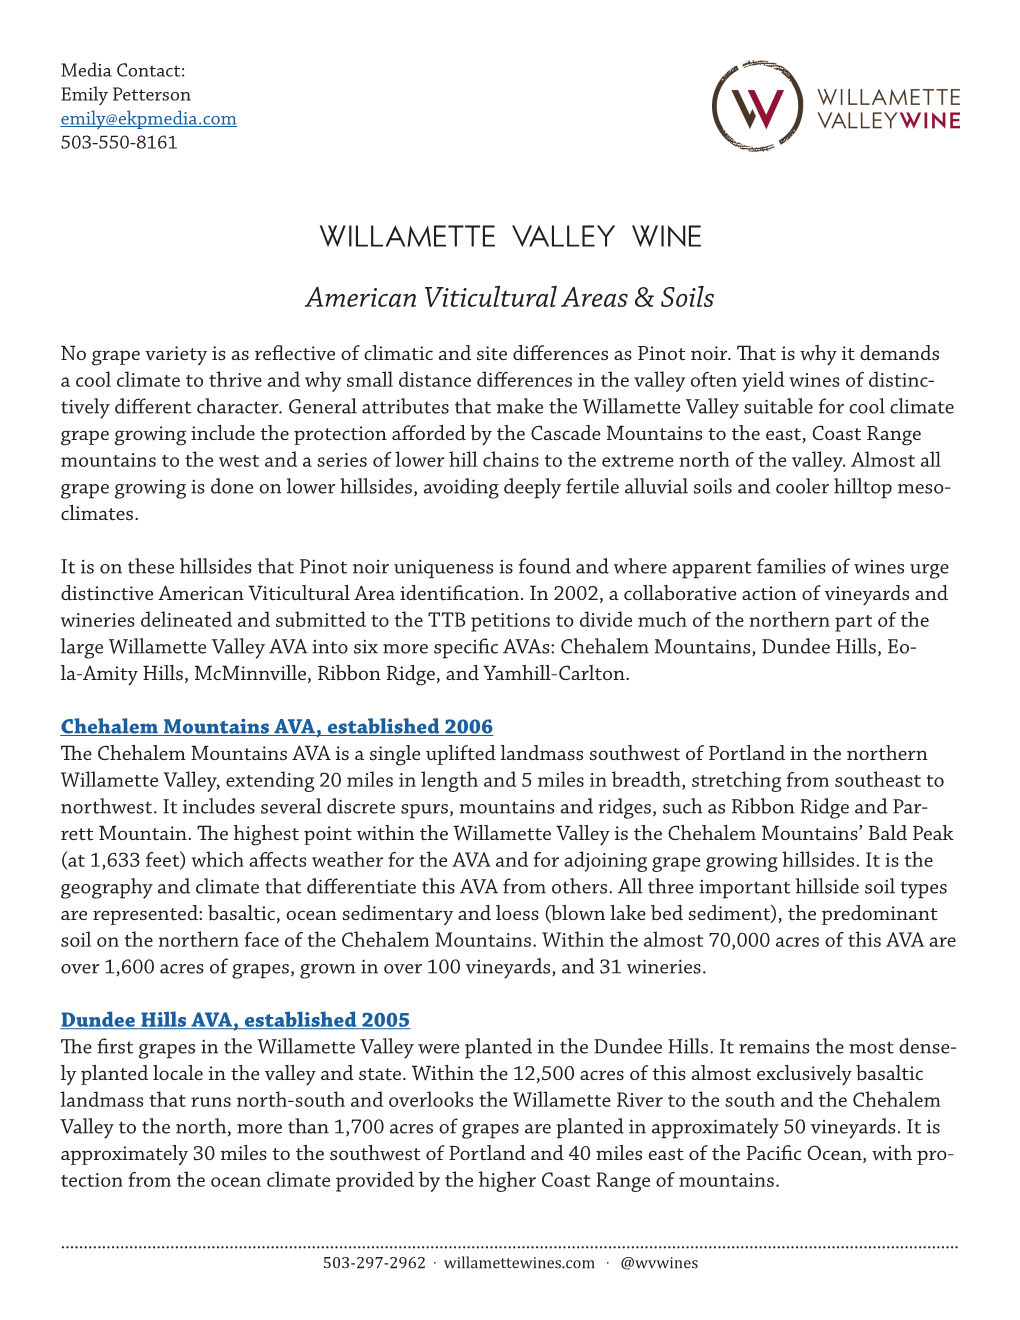 WILLAMETTE VALLEY WINE American Viticultural Areas & Soils